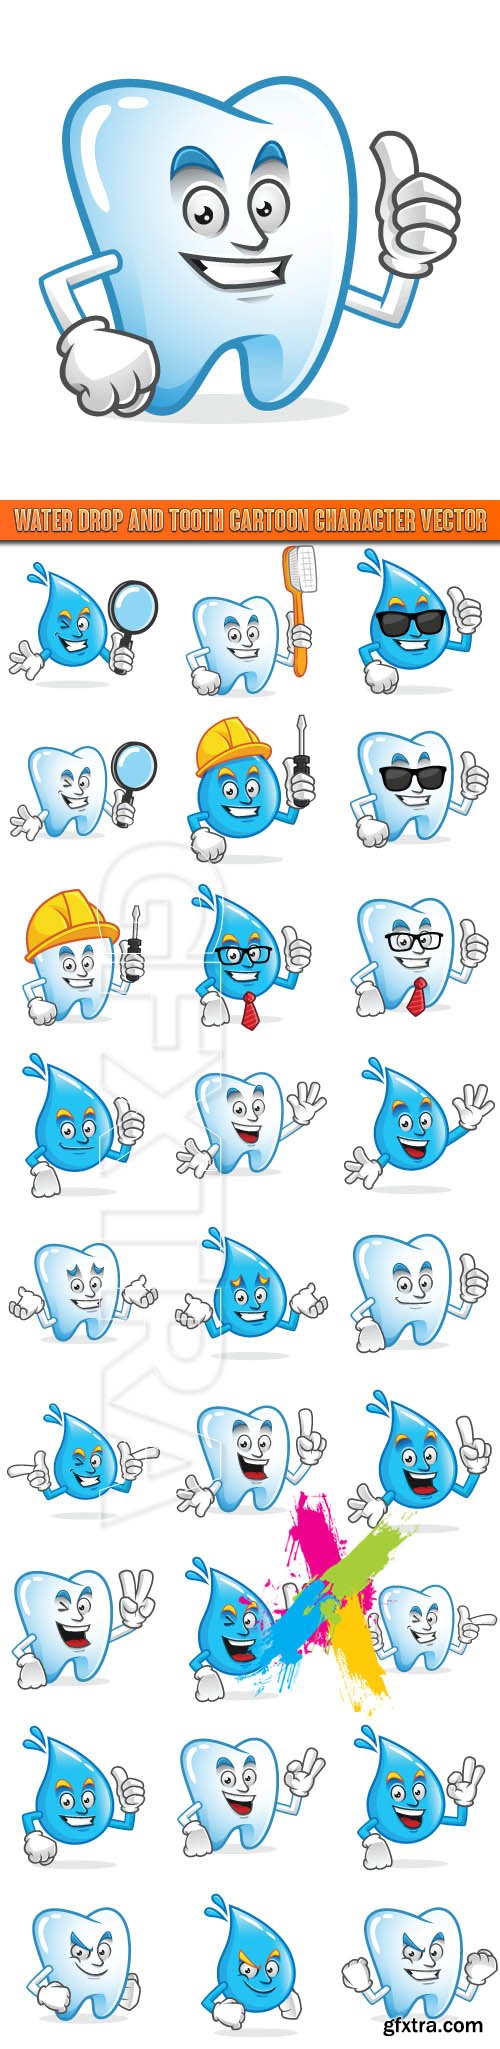 Water drop and tooth cartoon character vector